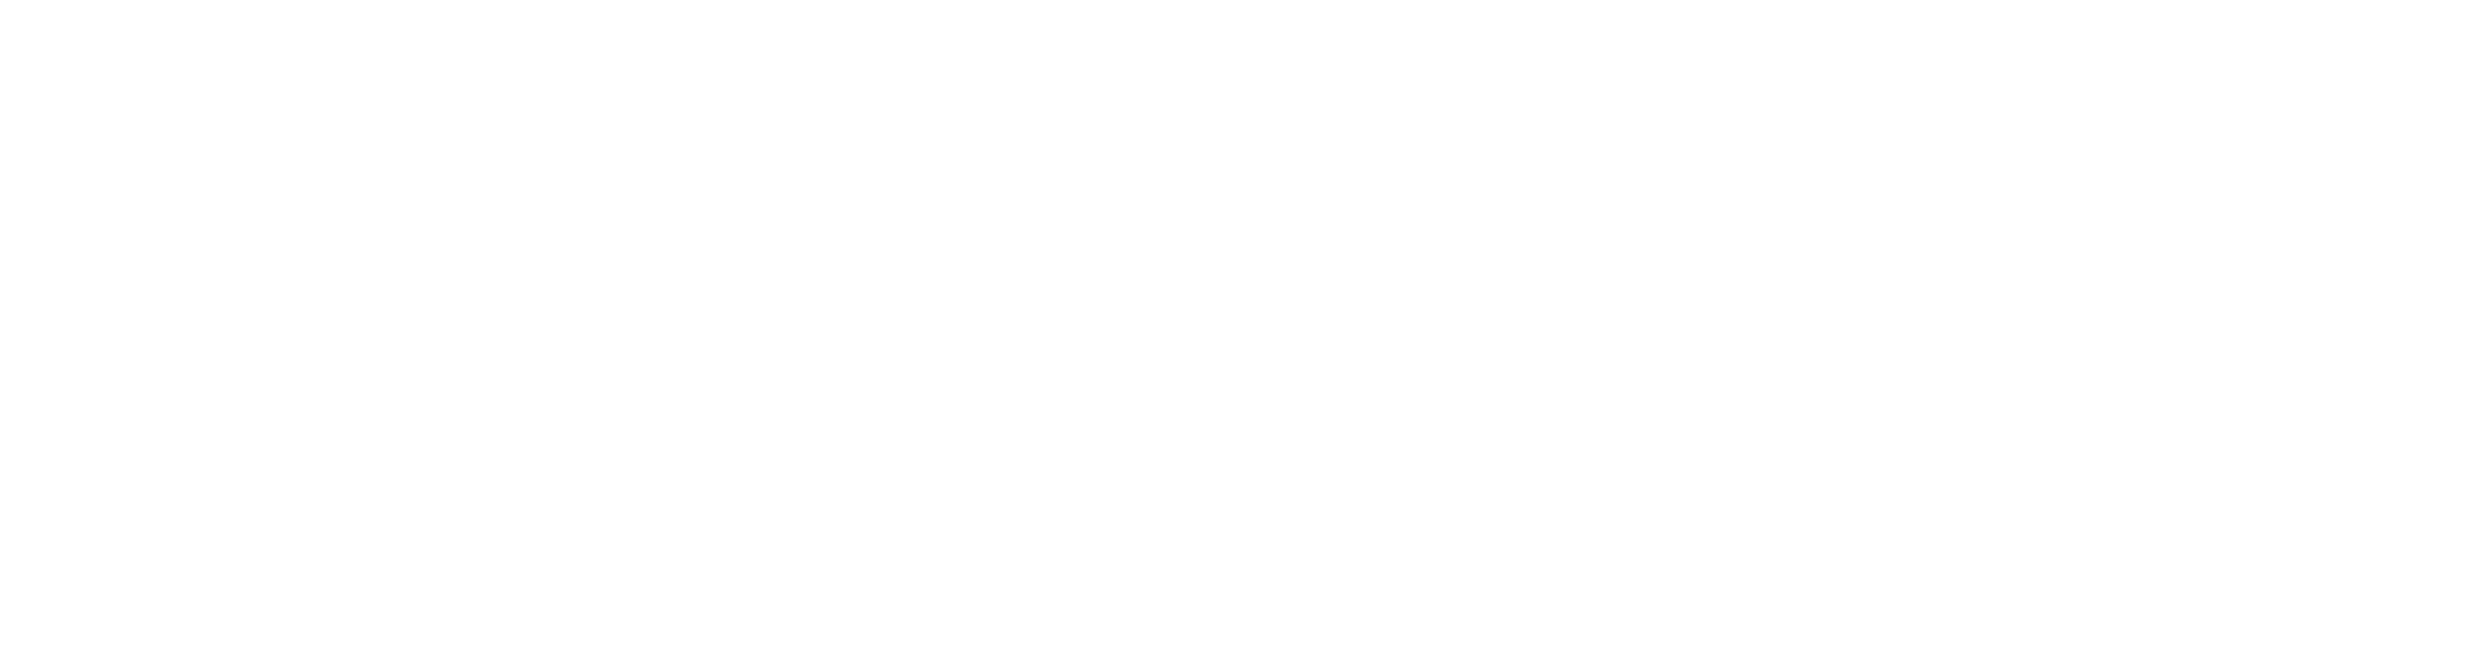 CDW Amplified for Education logo